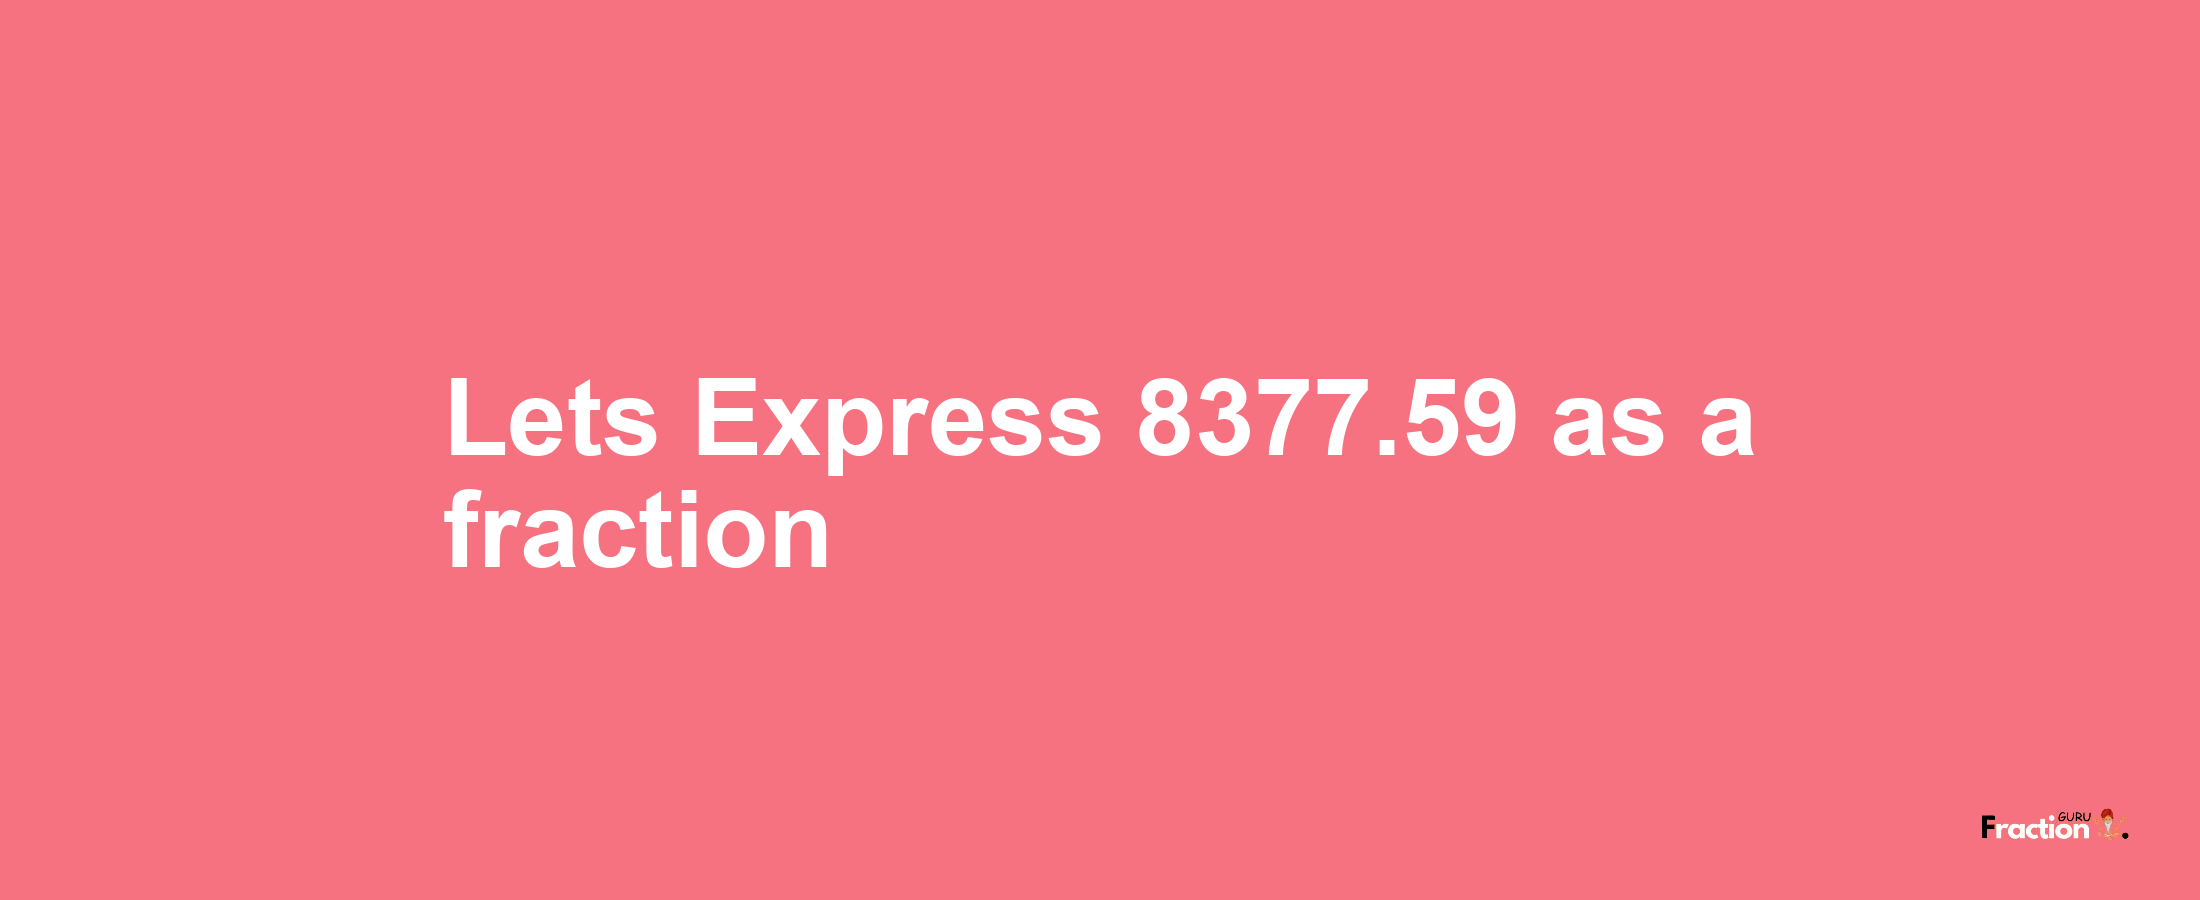 Lets Express 8377.59 as afraction